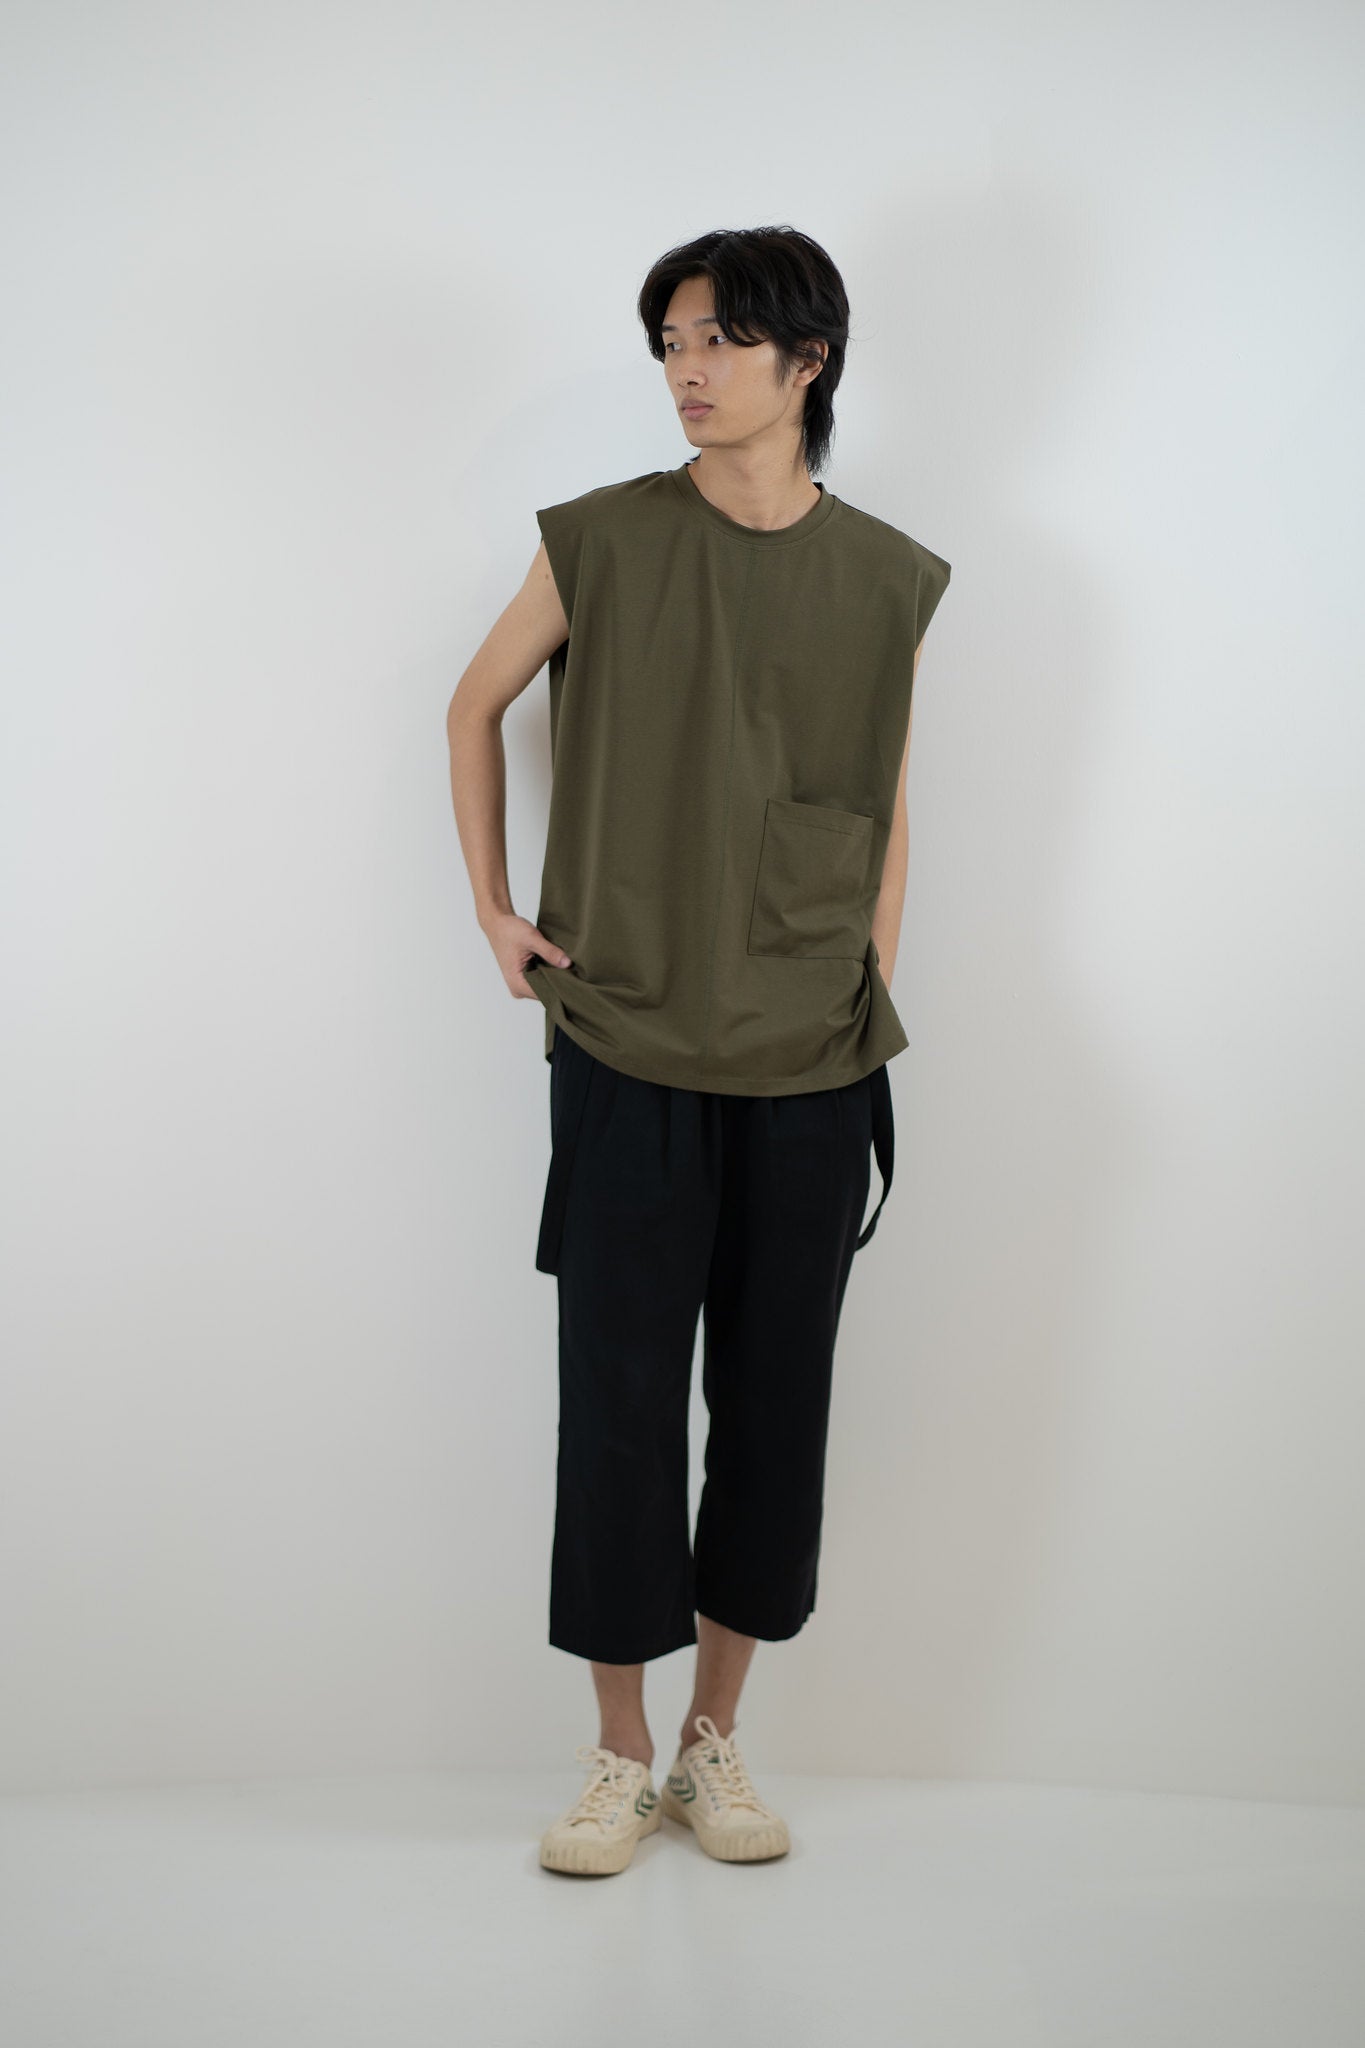 Sleeveless Tee - Olive Green - G R A Y E